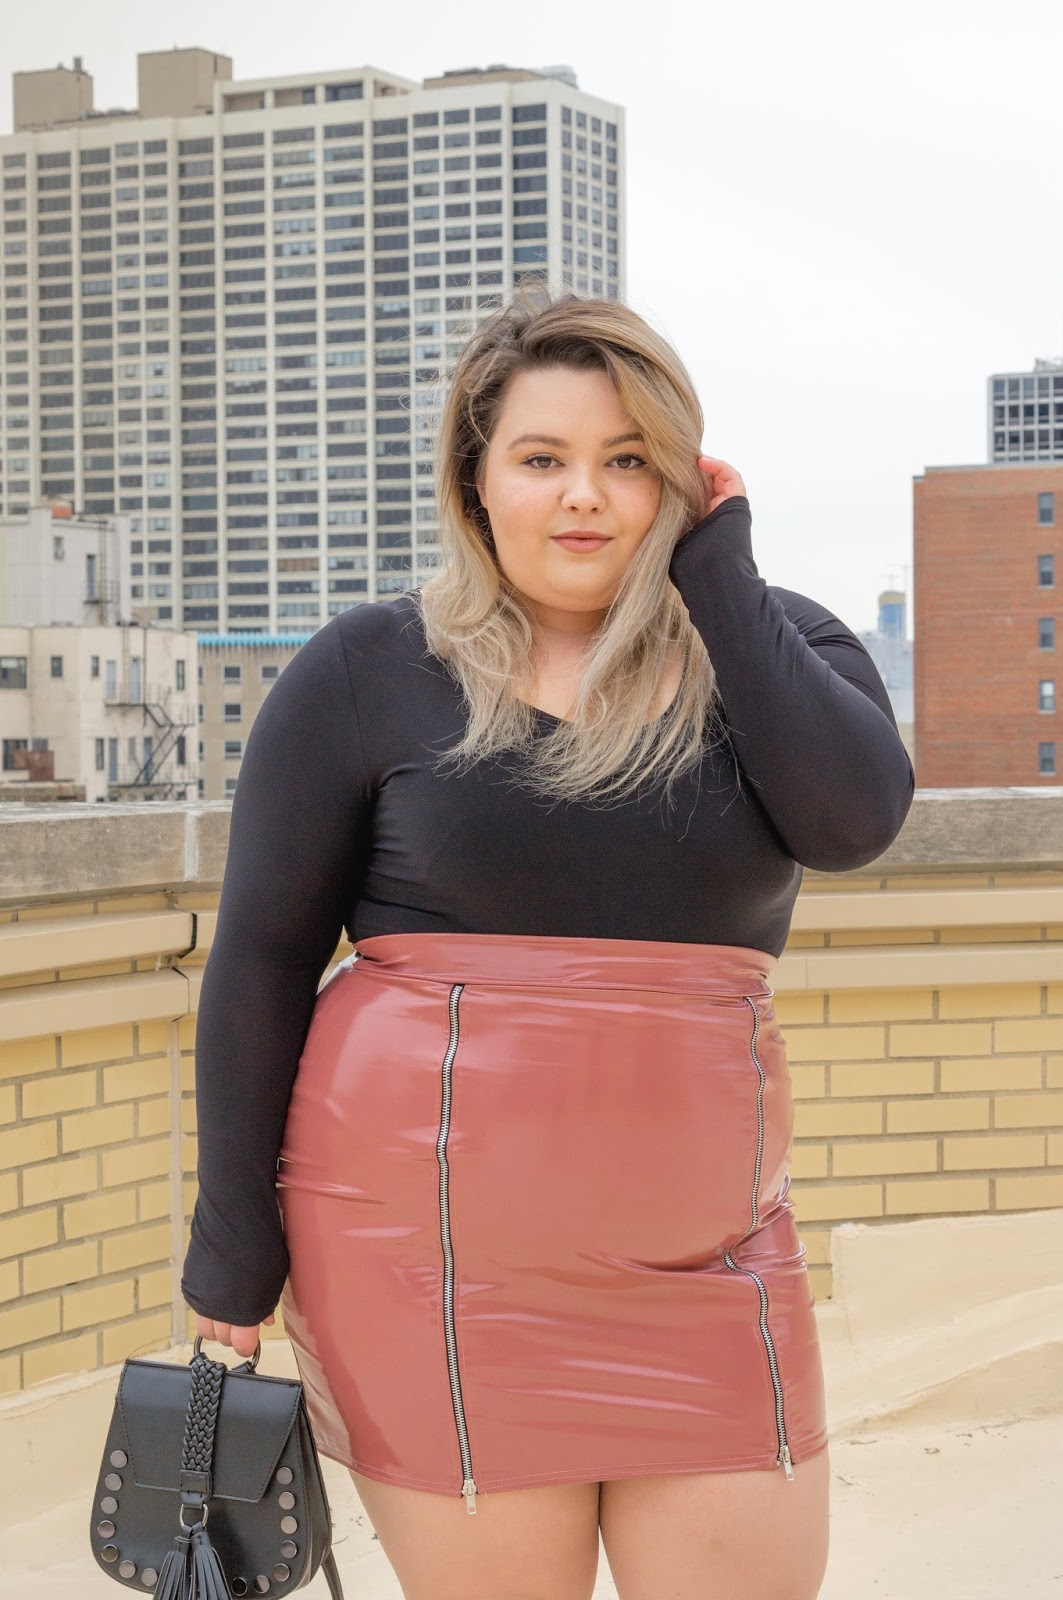 PRETTY LITTLE THING — Natalie in the City - A Chicago Petite Plus Size ...